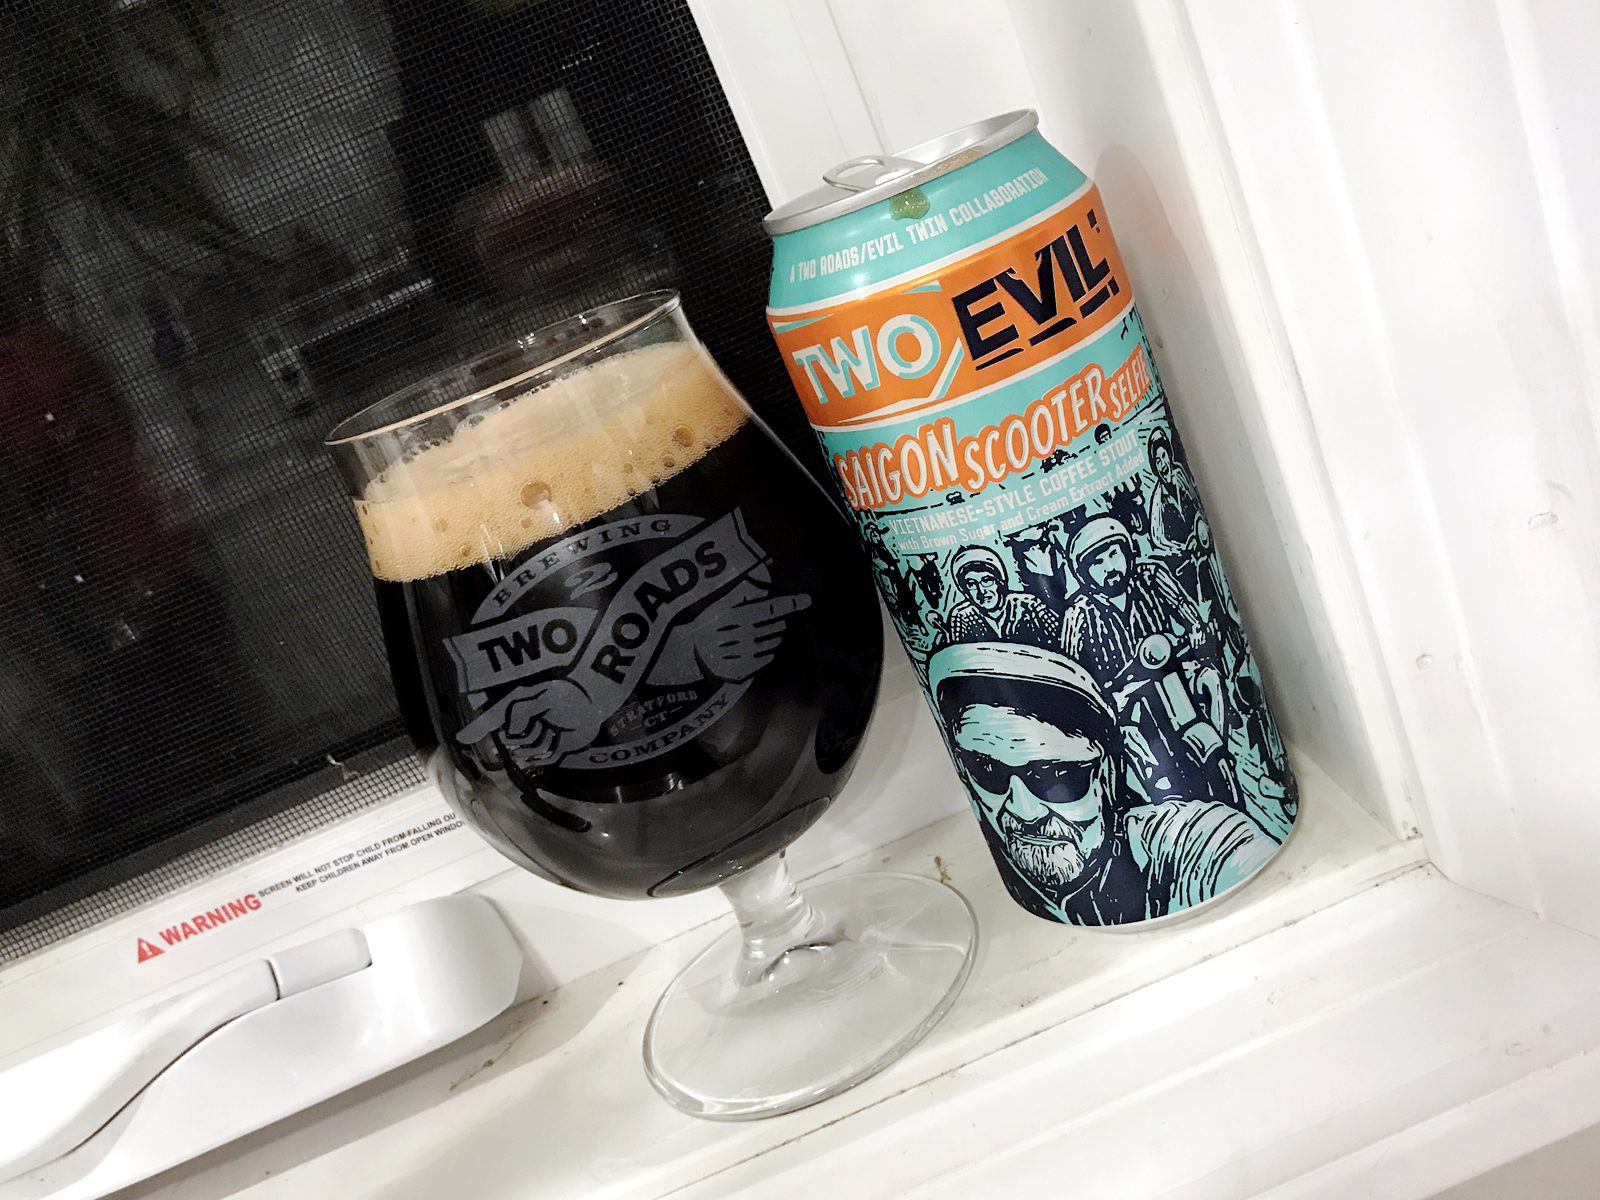 Two Roads Brewing Company: Two Evil: Saigon Scooter Selfie